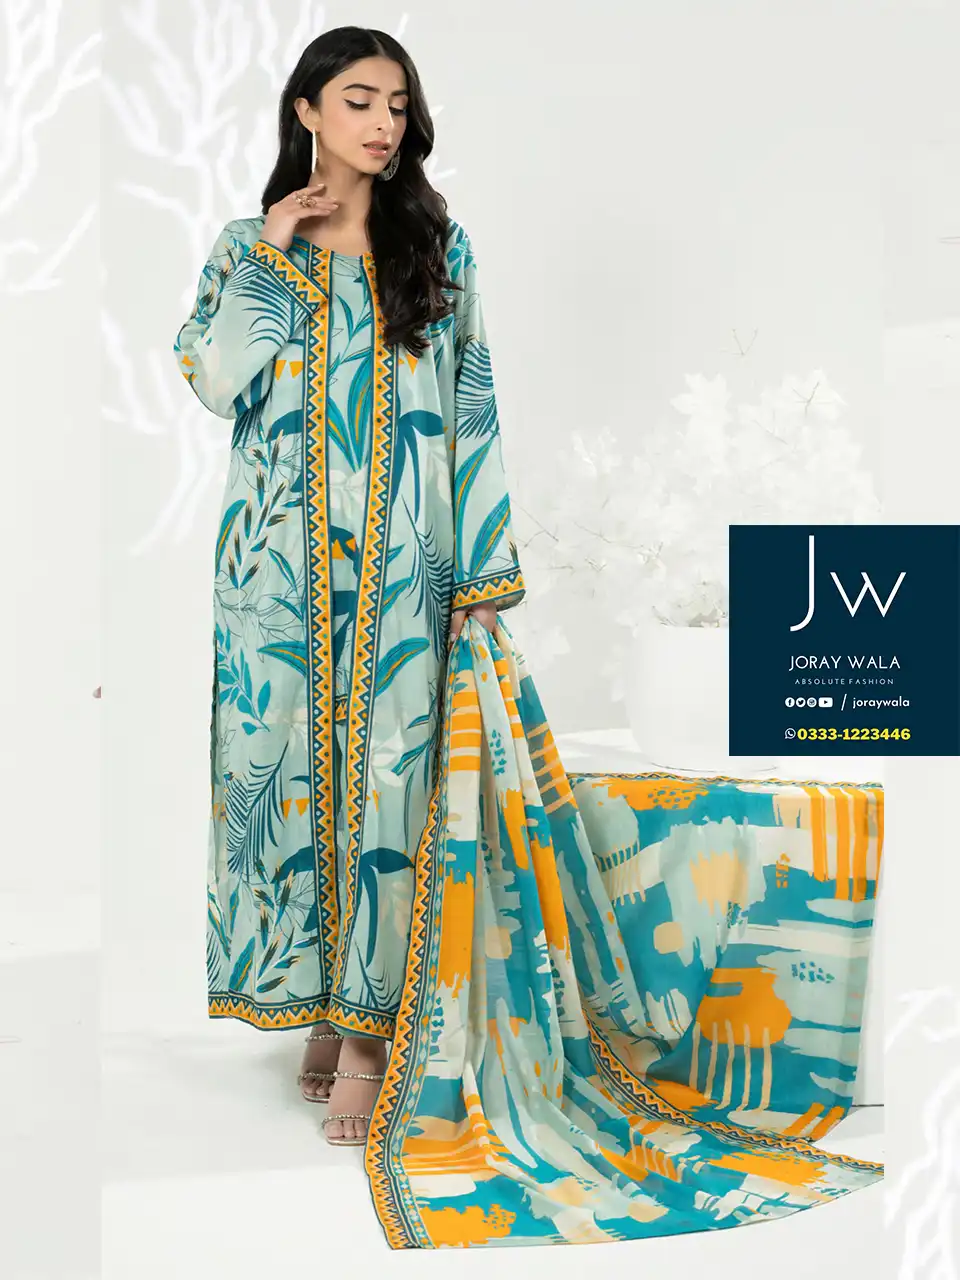 ZESH Printed Pop Series D4 available at joraywala with free delivery